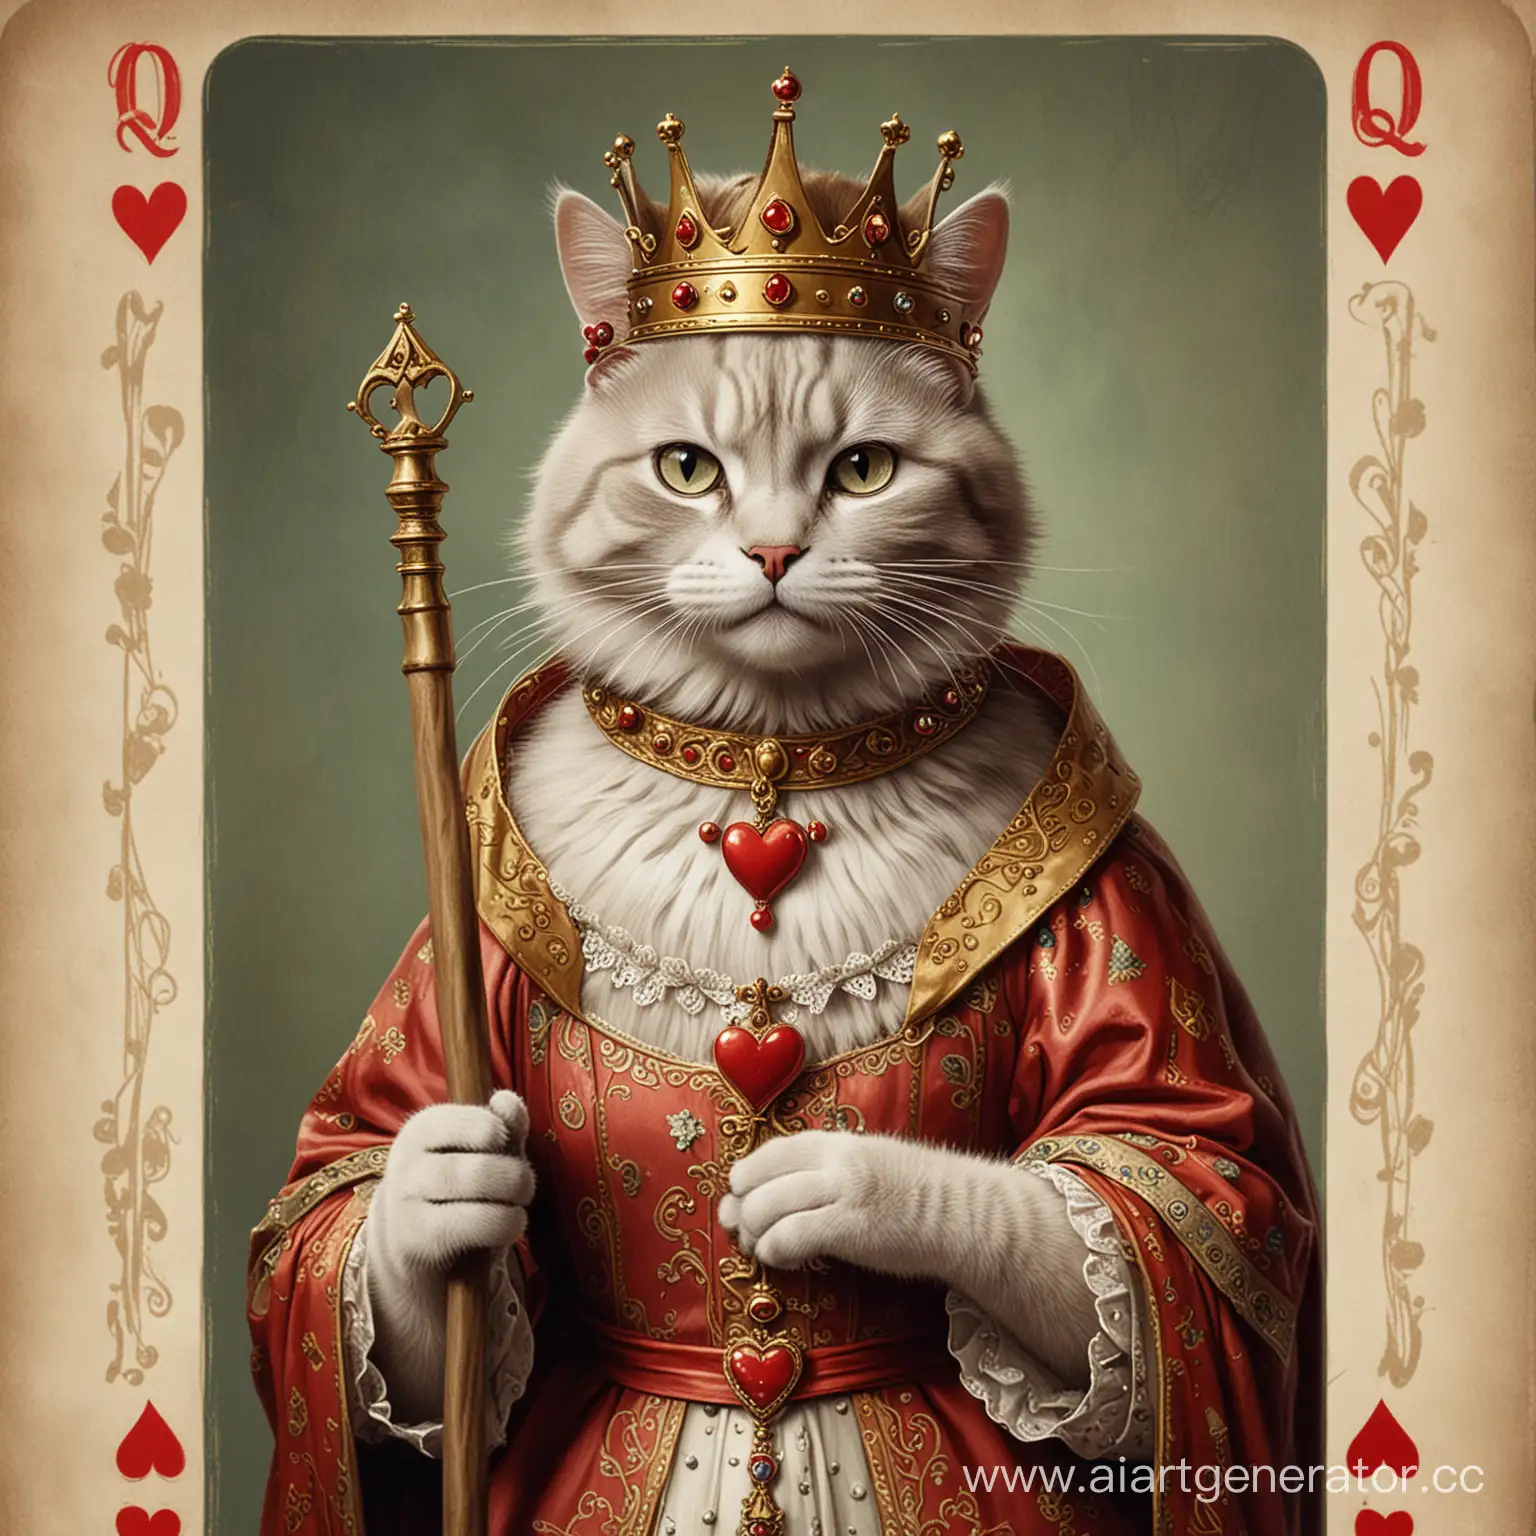 The queen of hearts playing card.
The cat is holding a staff. She has a crown on her head.